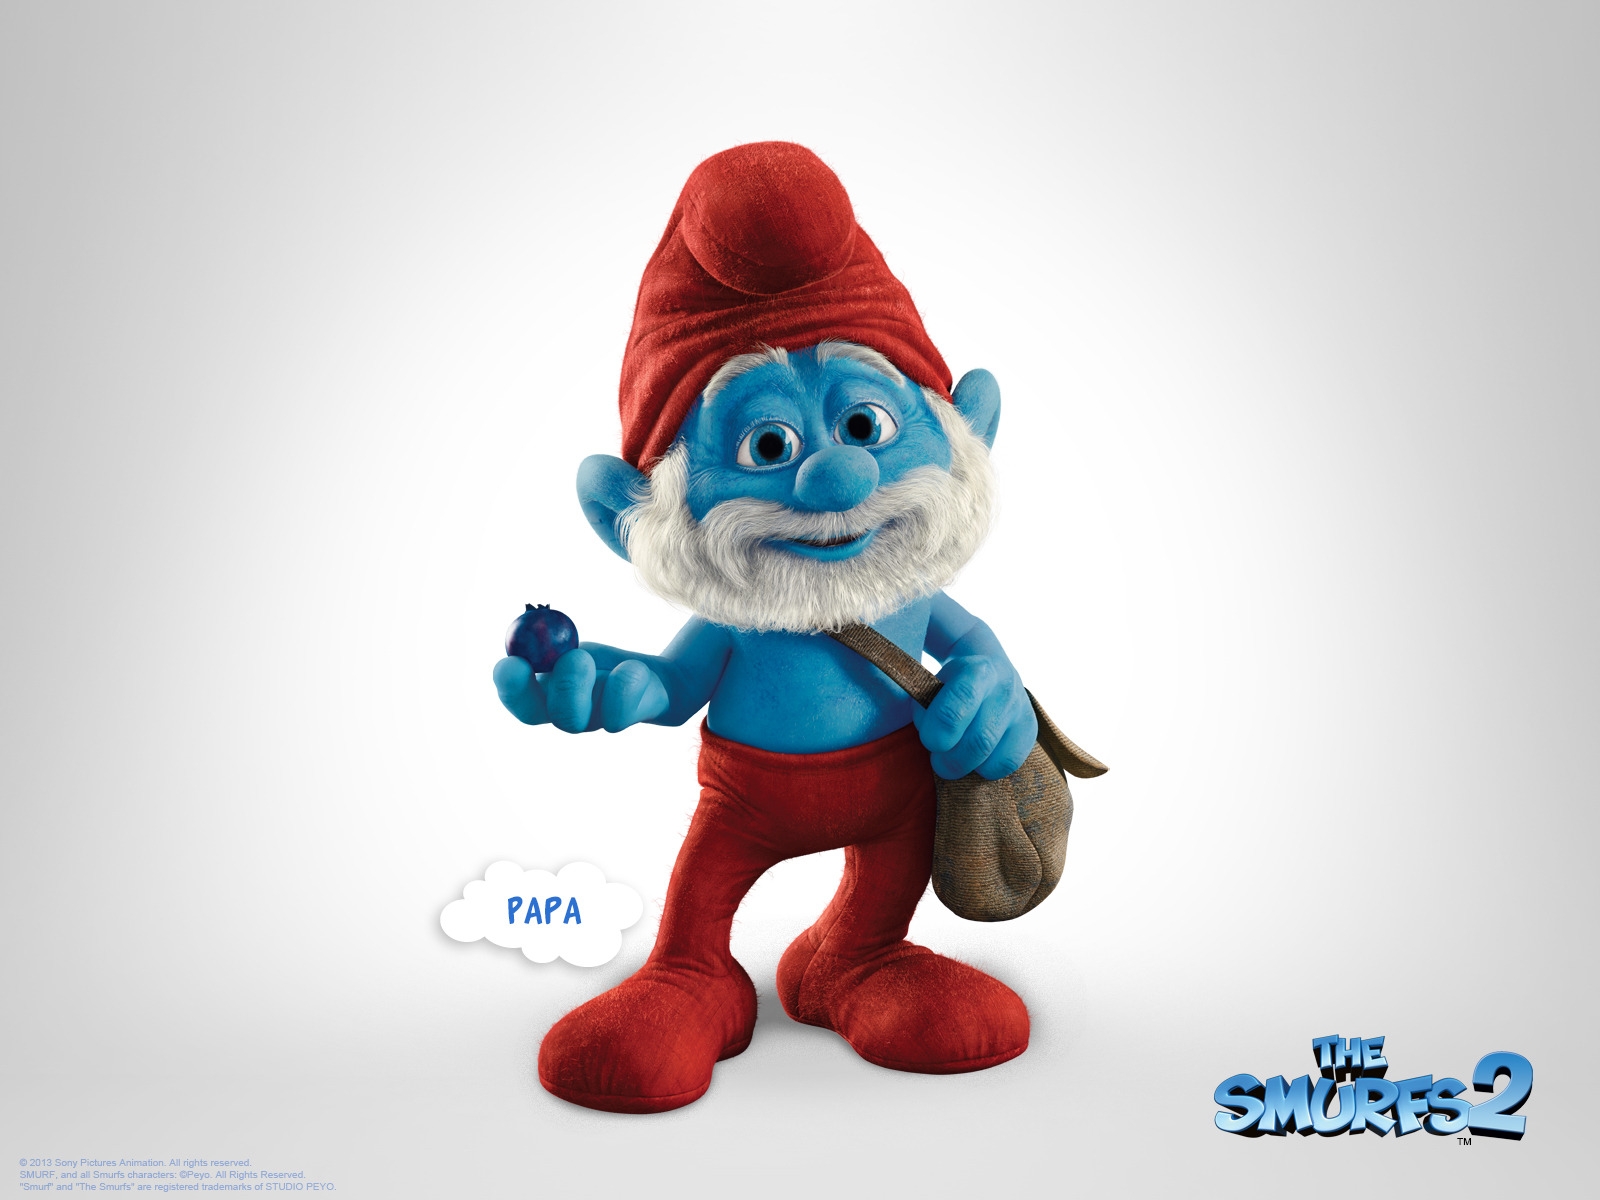 Papa The Smurfs 2 for 1600 x 1200 resolution